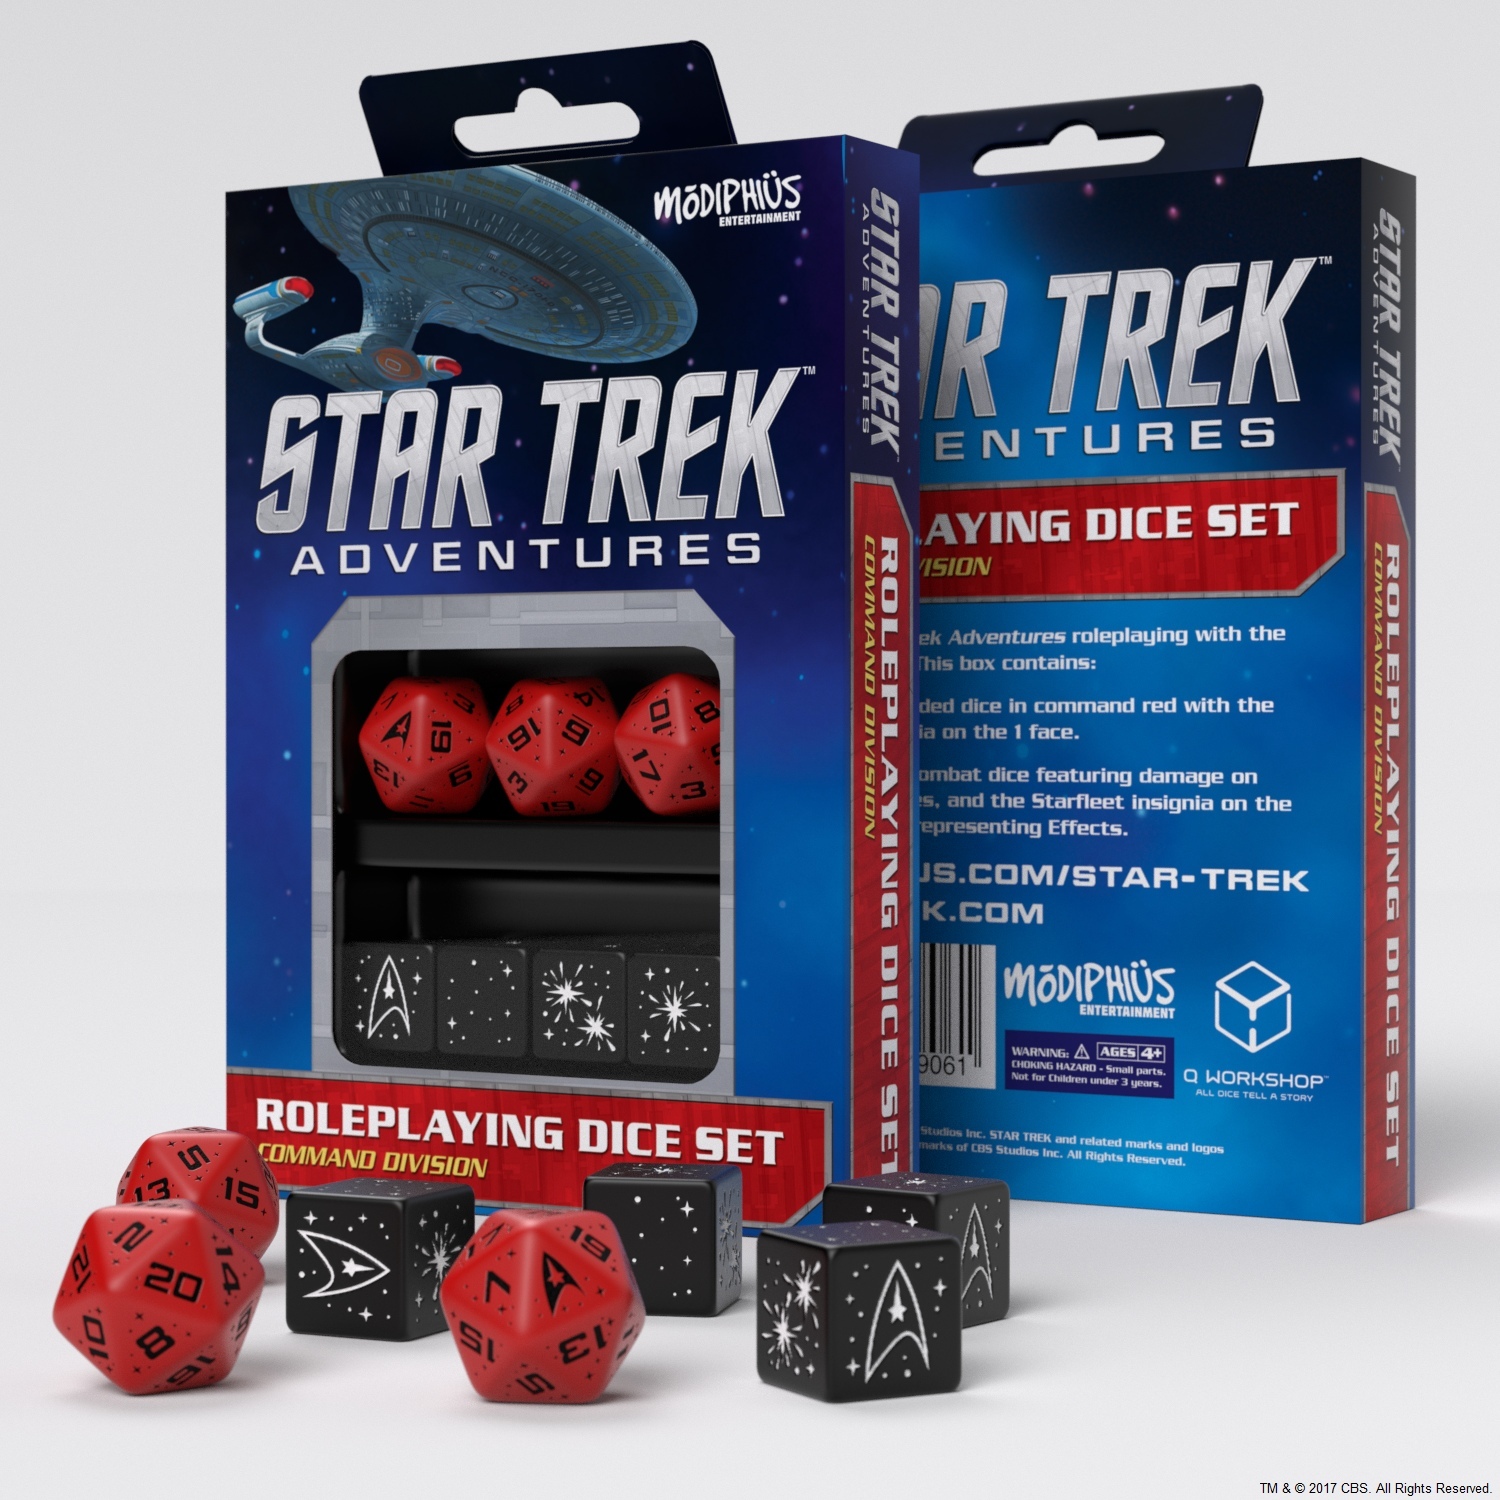 All About Star Trek: Adventures in Space! - Longpost, Video, Tabletop role-playing games, Our NRI, Dungeons & dragons, Star trek, Star Trek: Discovery, My